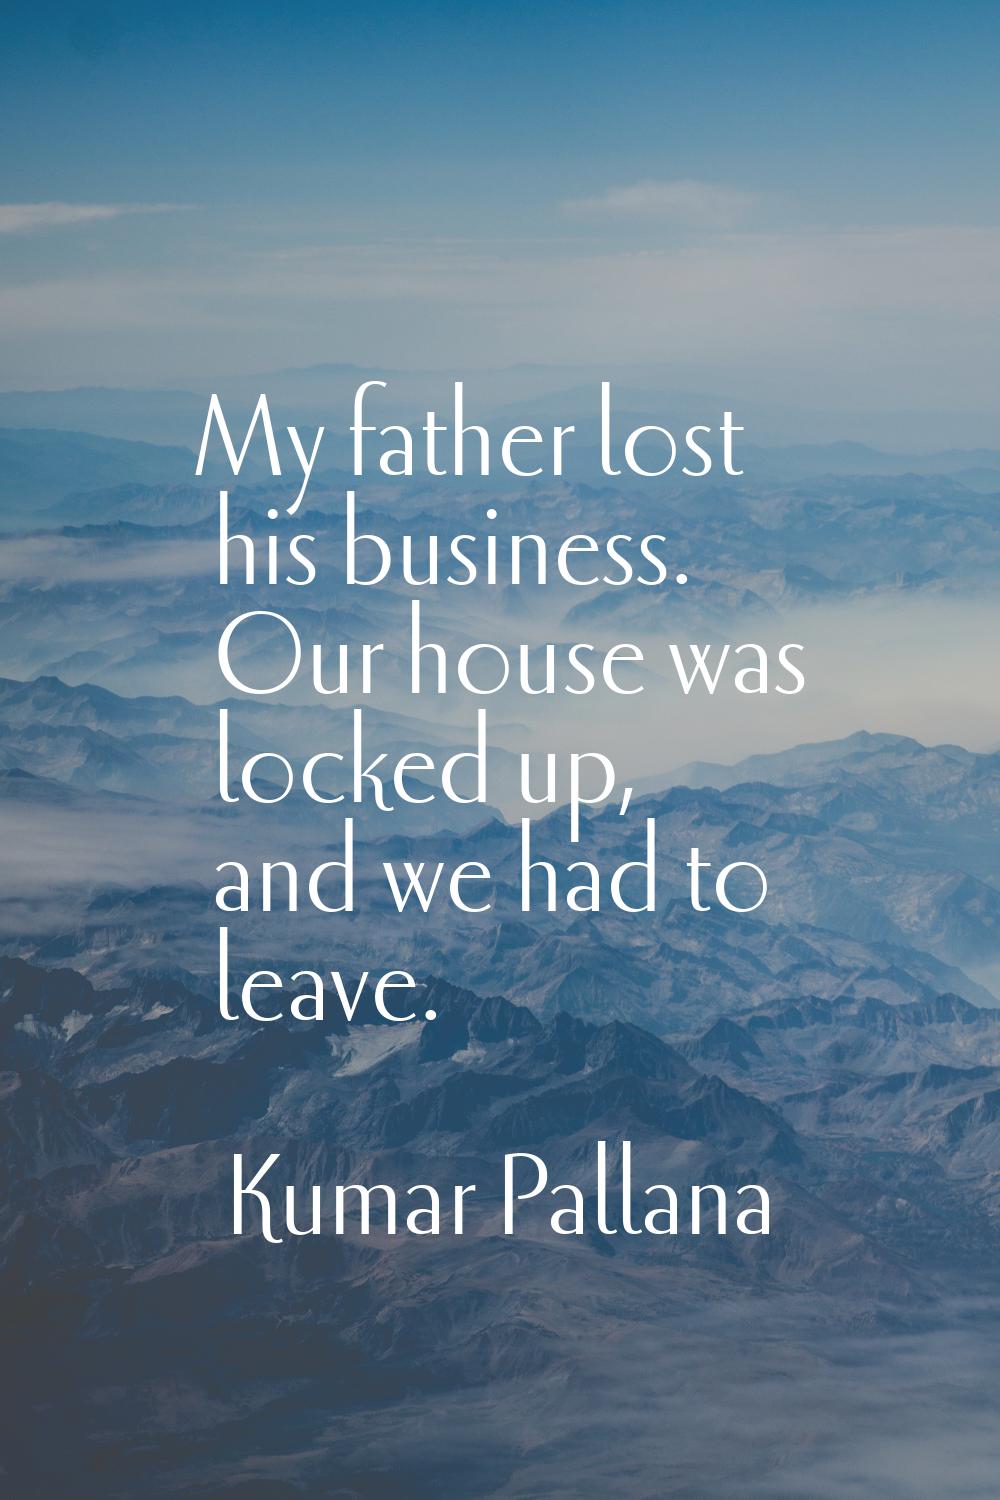 My father lost his business. Our house was locked up, and we had to leave.